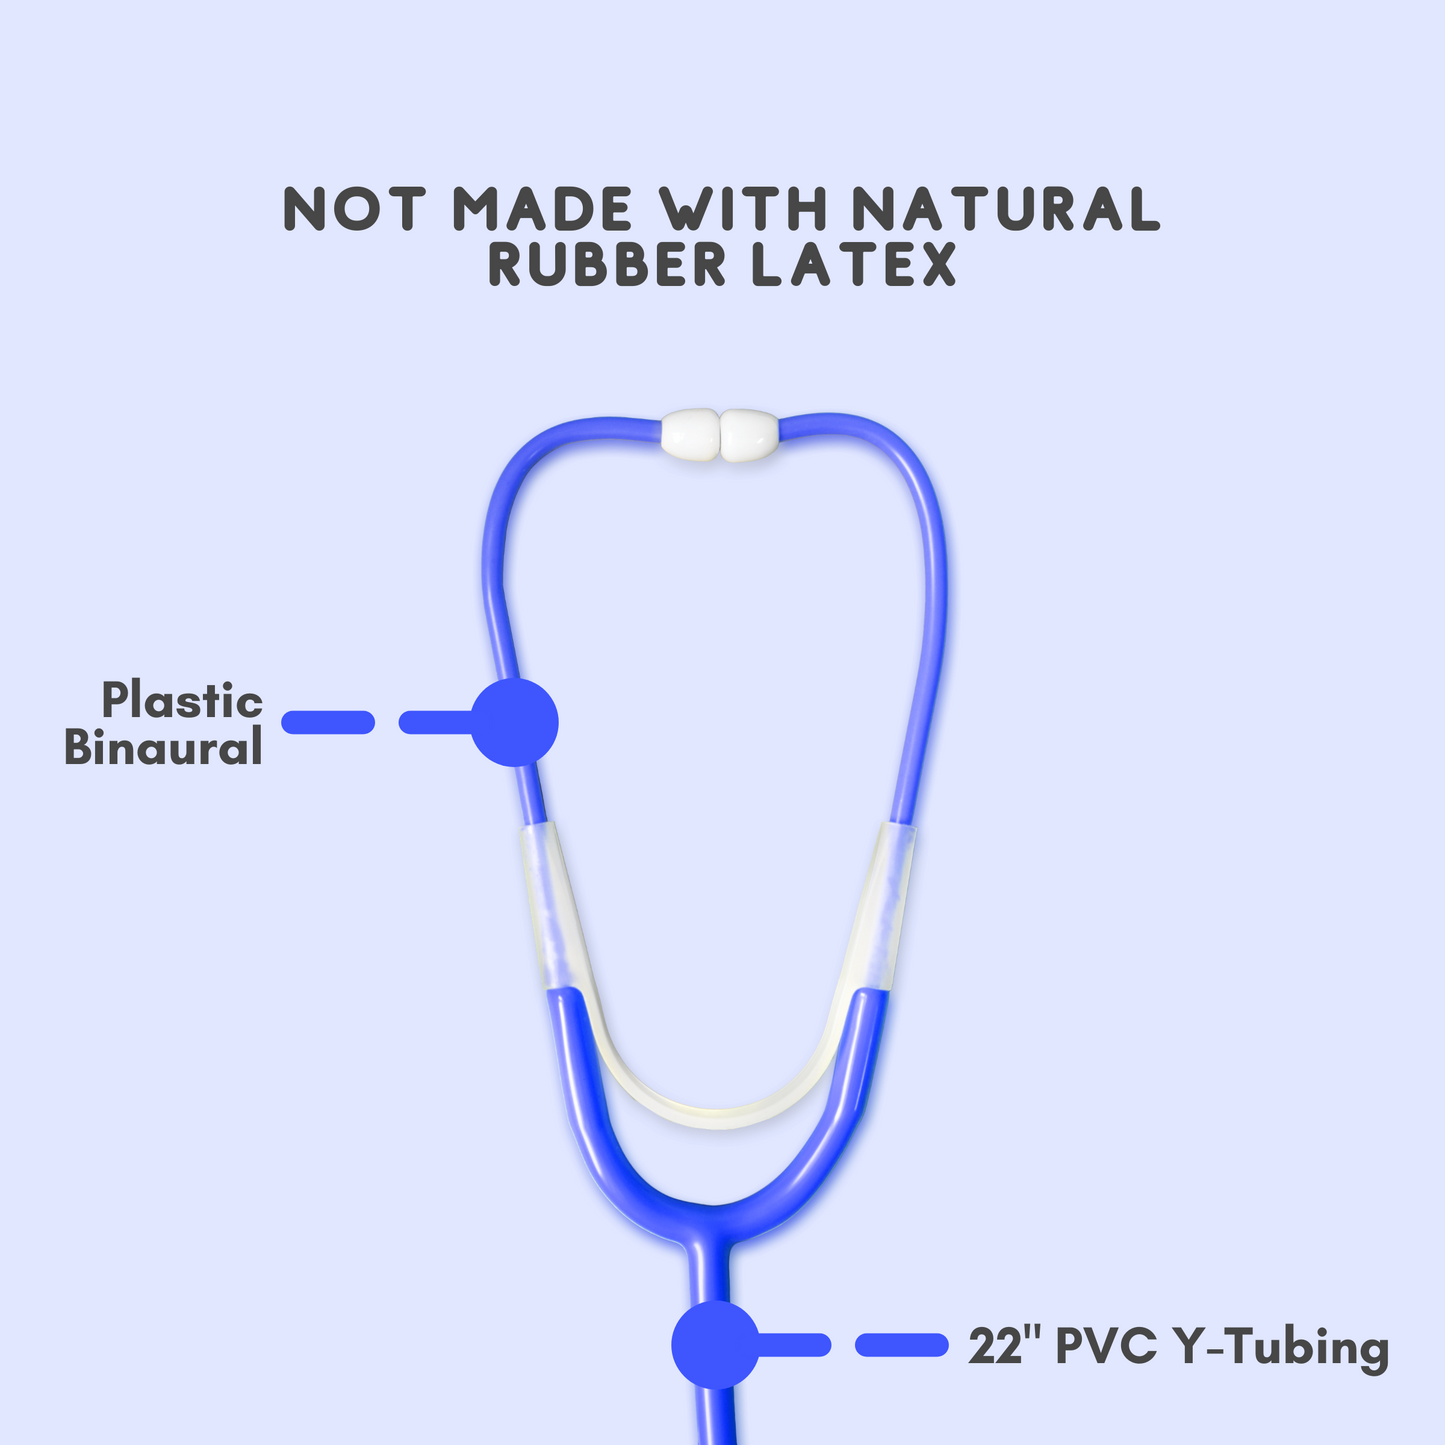 Blue Single Patient Use/Disposable Stethoscope